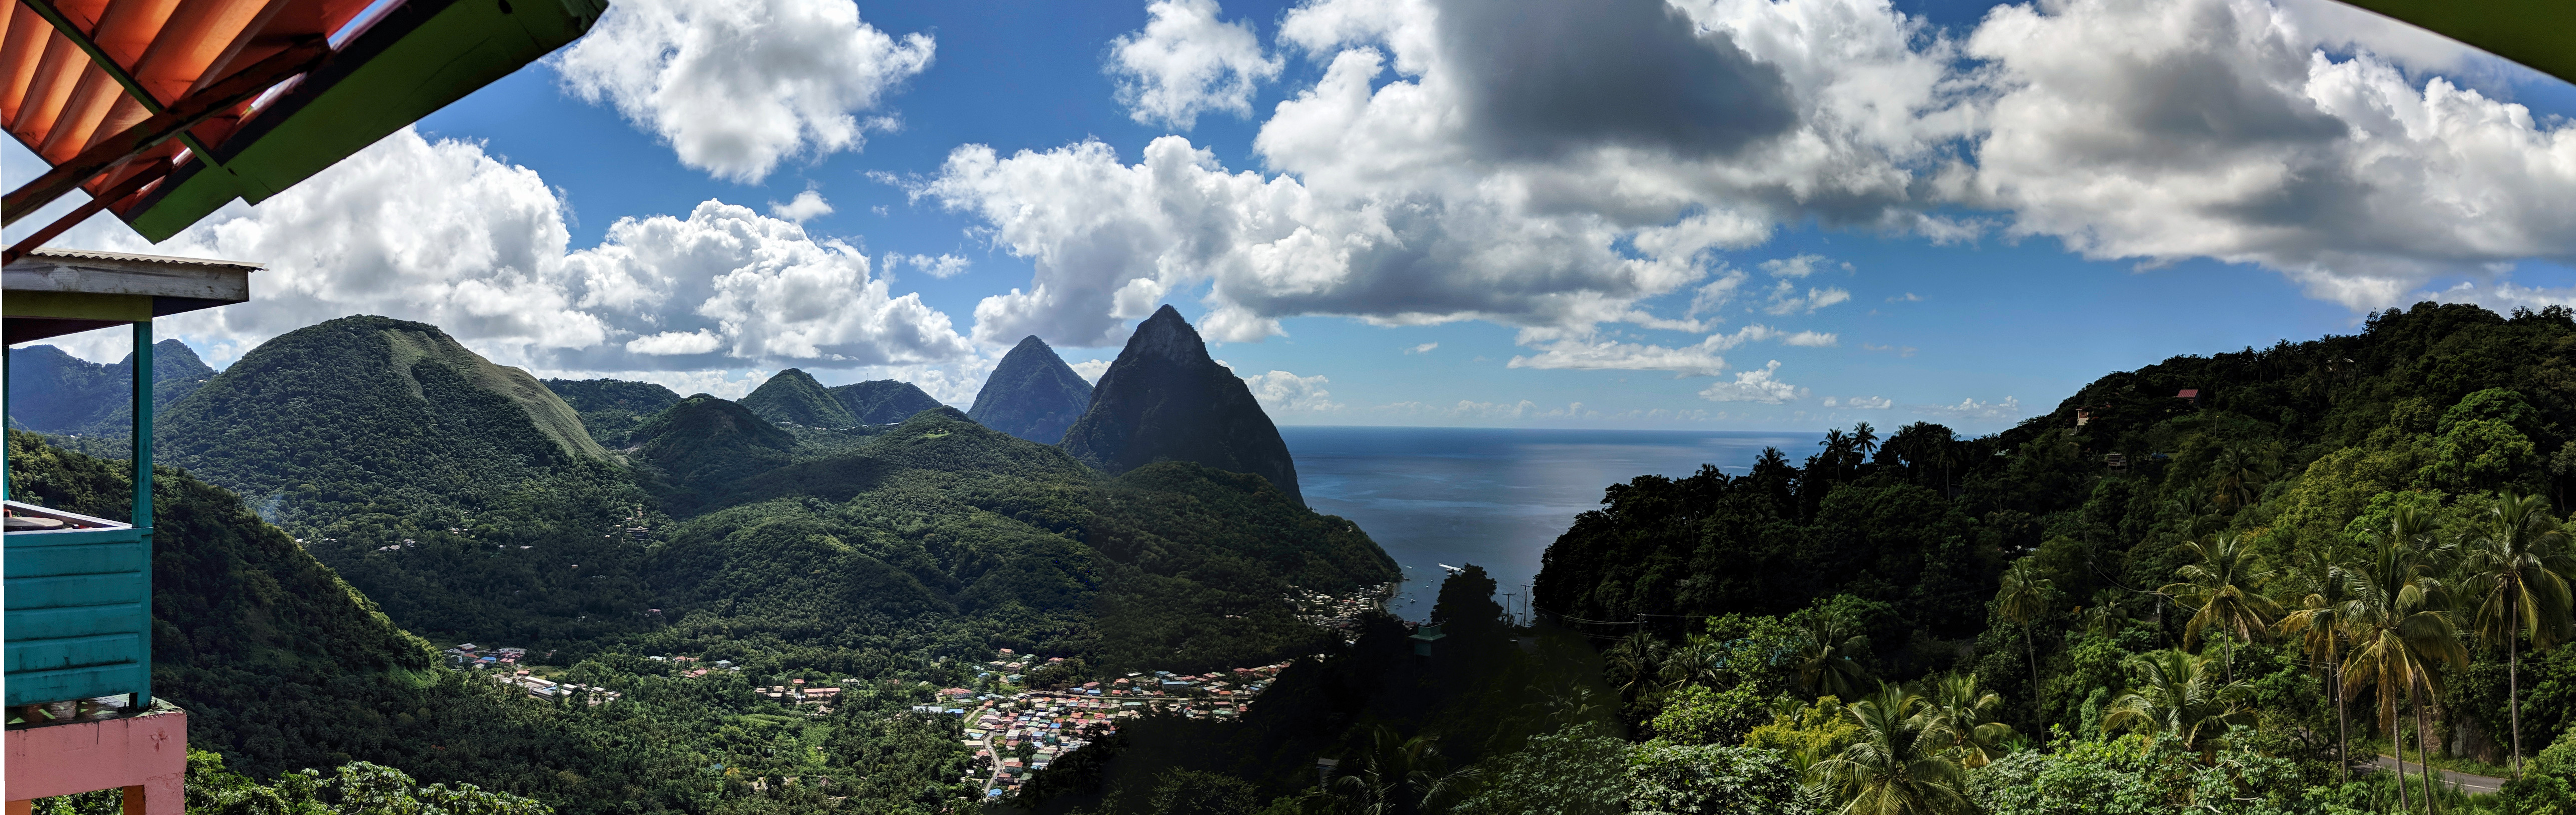 Pitons from The Beacon